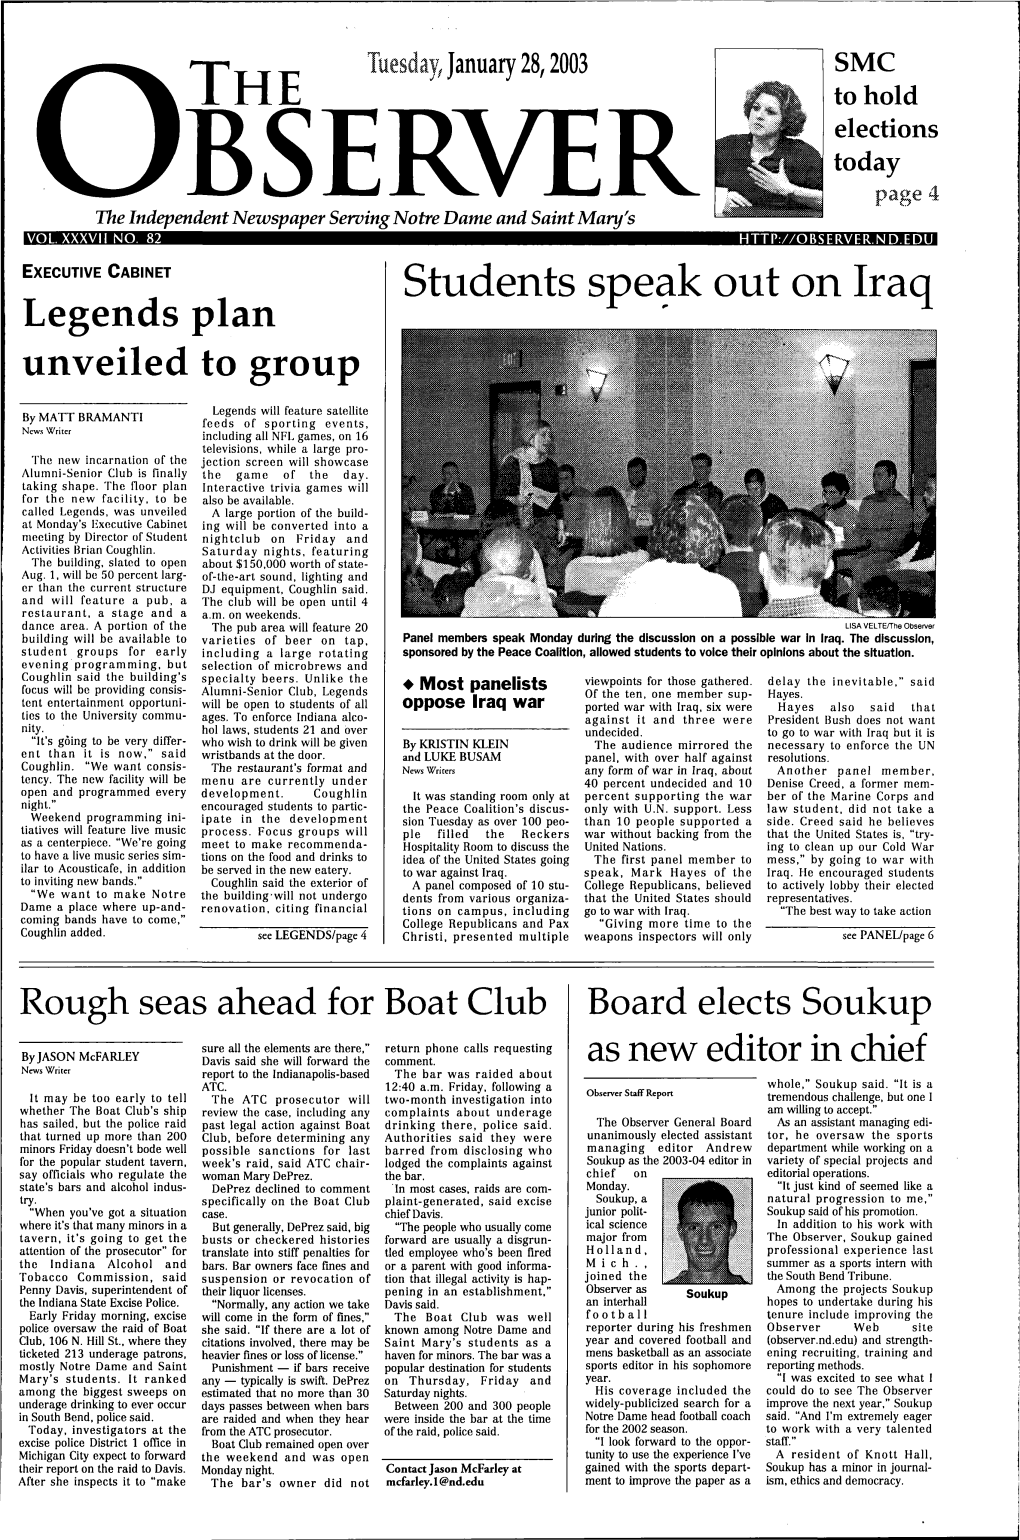 Students Spe~K out on Iraq Legends Pian Unveiled to Group